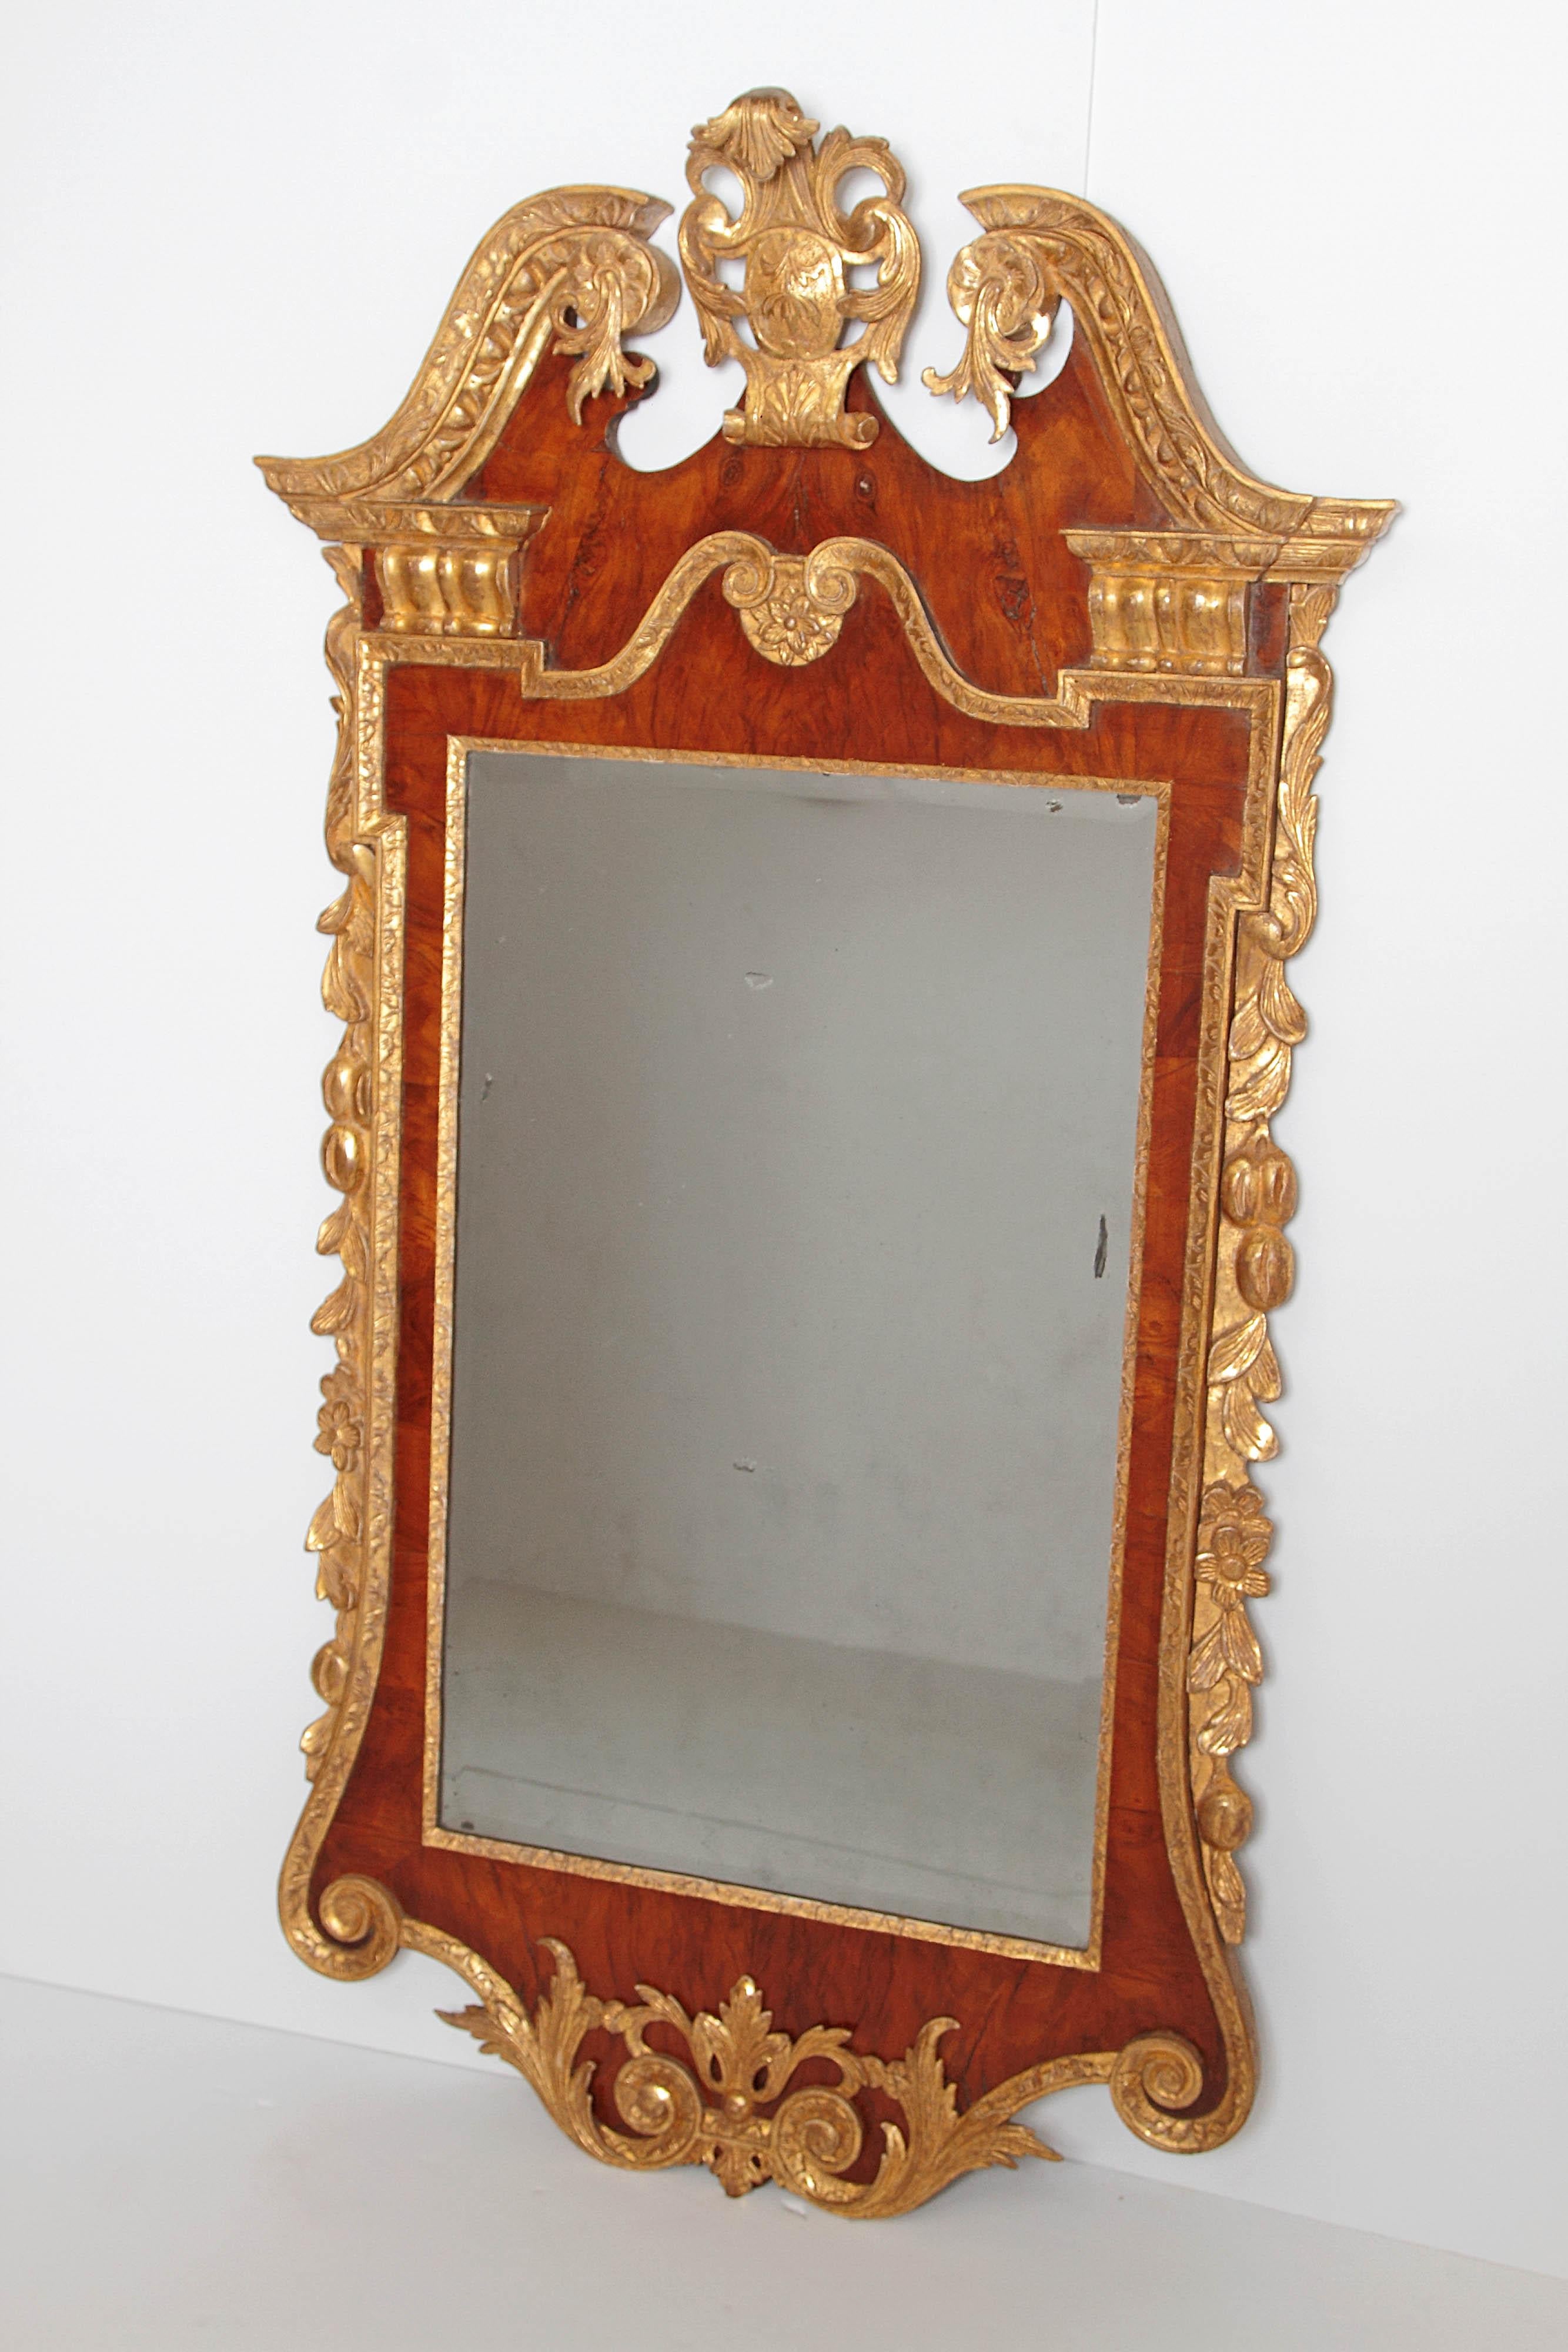 A circa 1740, period George II pier glass / mirror with beautiful bookmatched walnut veneers and having carved gilded embellishments, broken pediment top with gilded center shield surrounded by acanthus leaves and gilded floral cascades down each